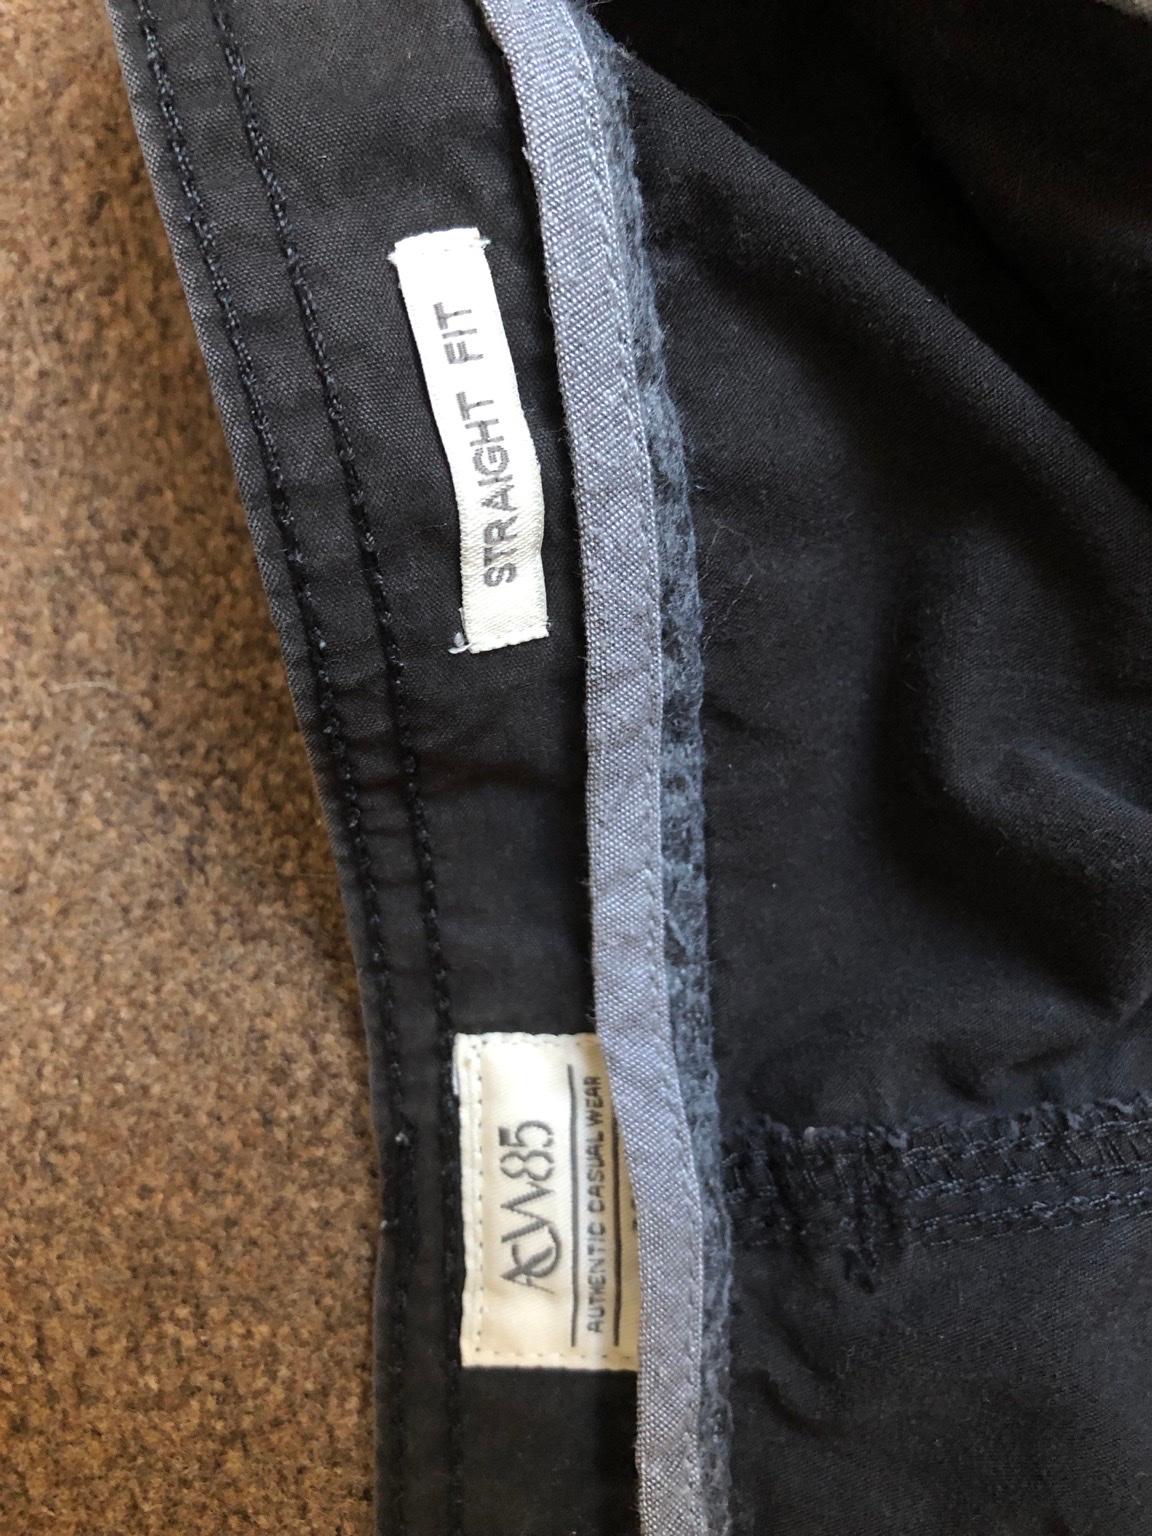 Black Cargo Trousers in DA8 London for £4.00 for sale | Shpock